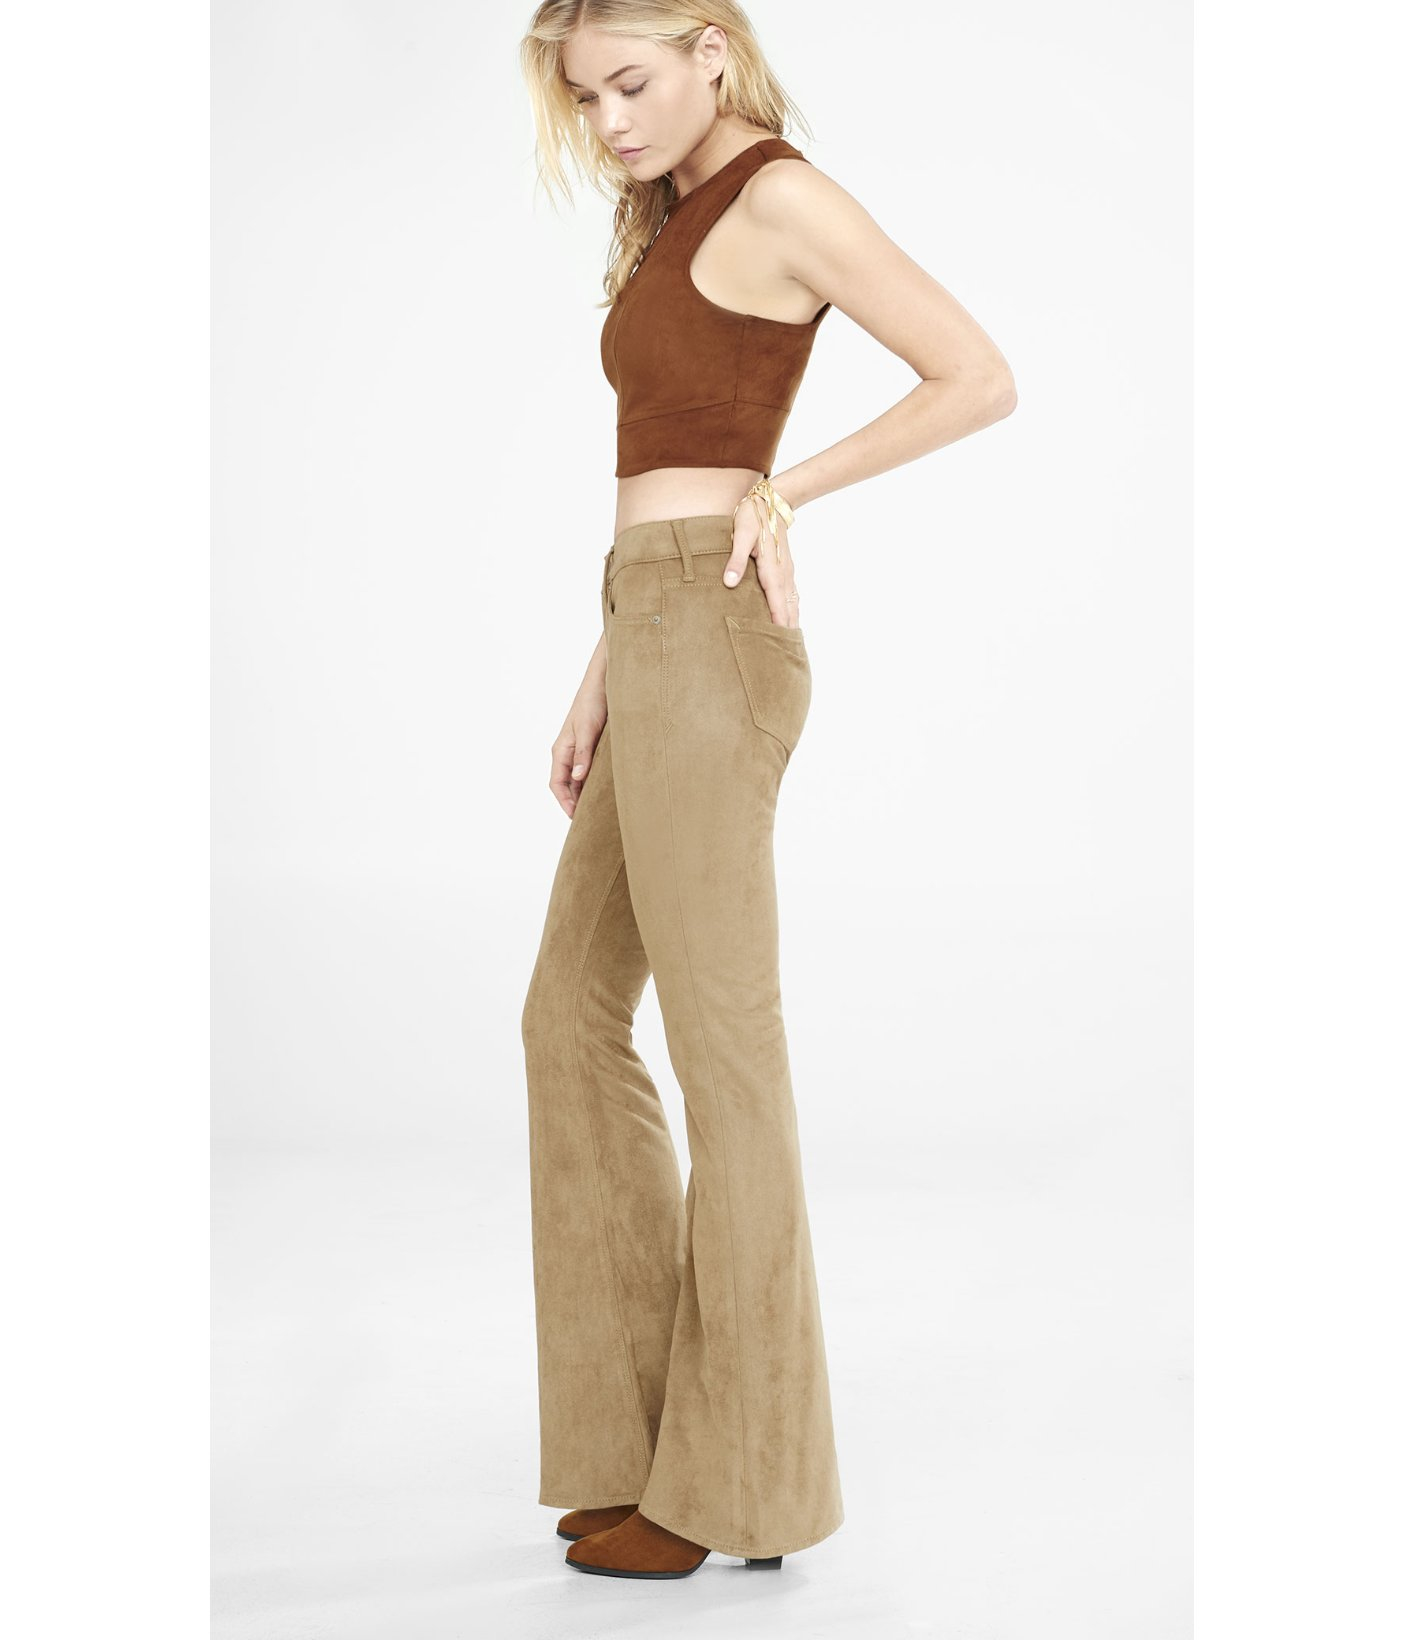 Express Pants Bell Flare Size 0 Reg Mid Rise Faux Suede Camel Inseam 34 NWT $98